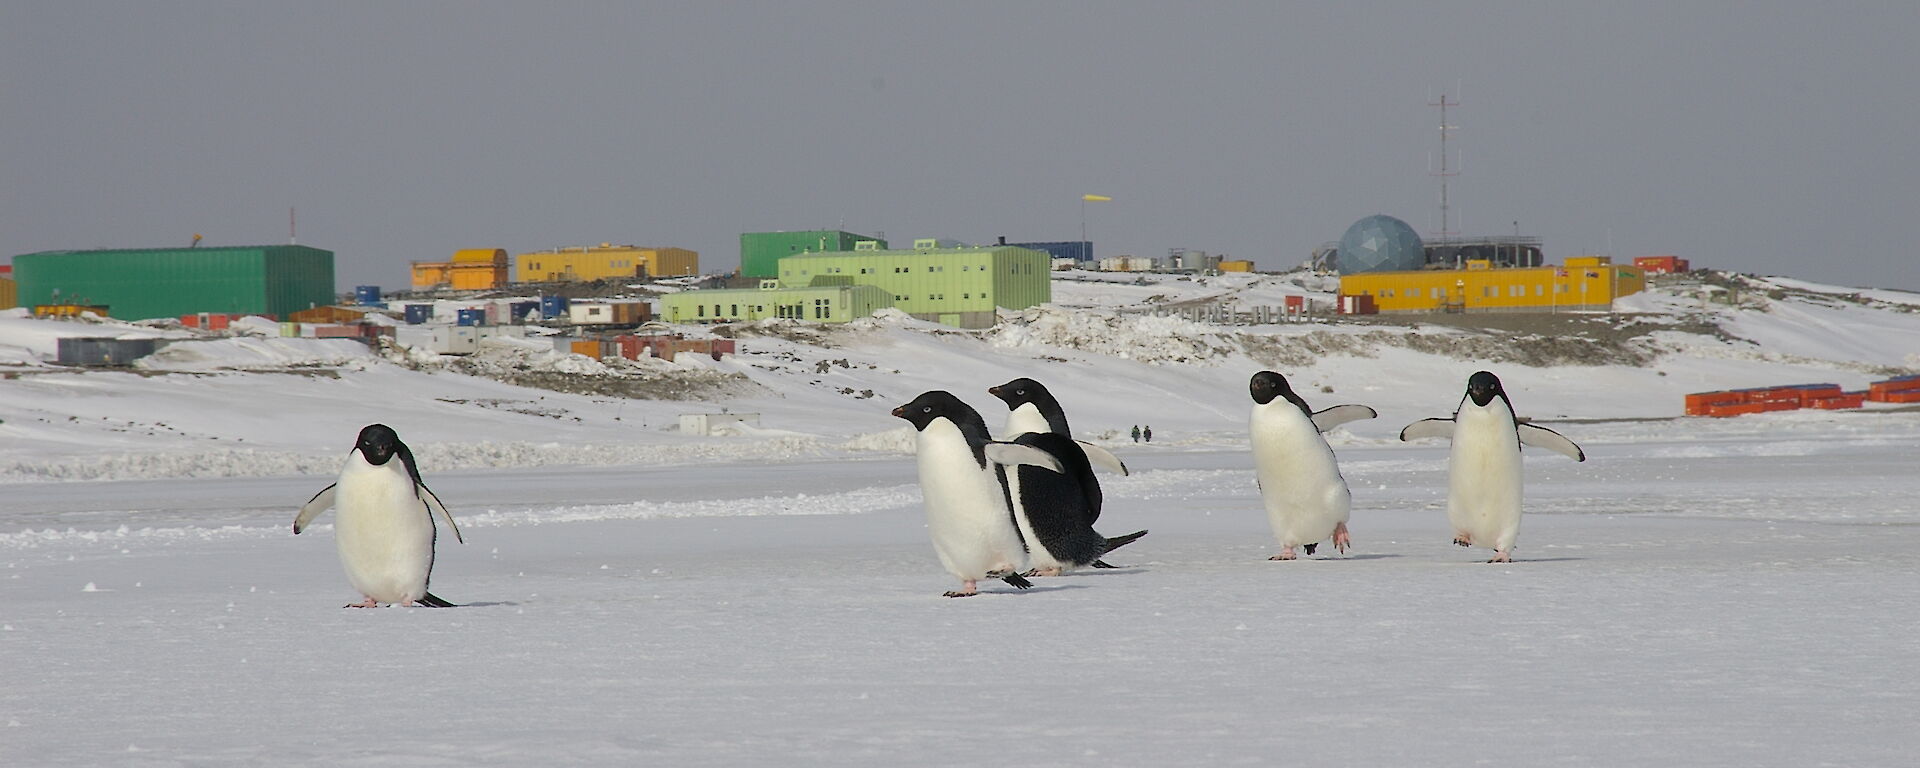 Adelie penguins on sea ice in foreground with Davis station in background